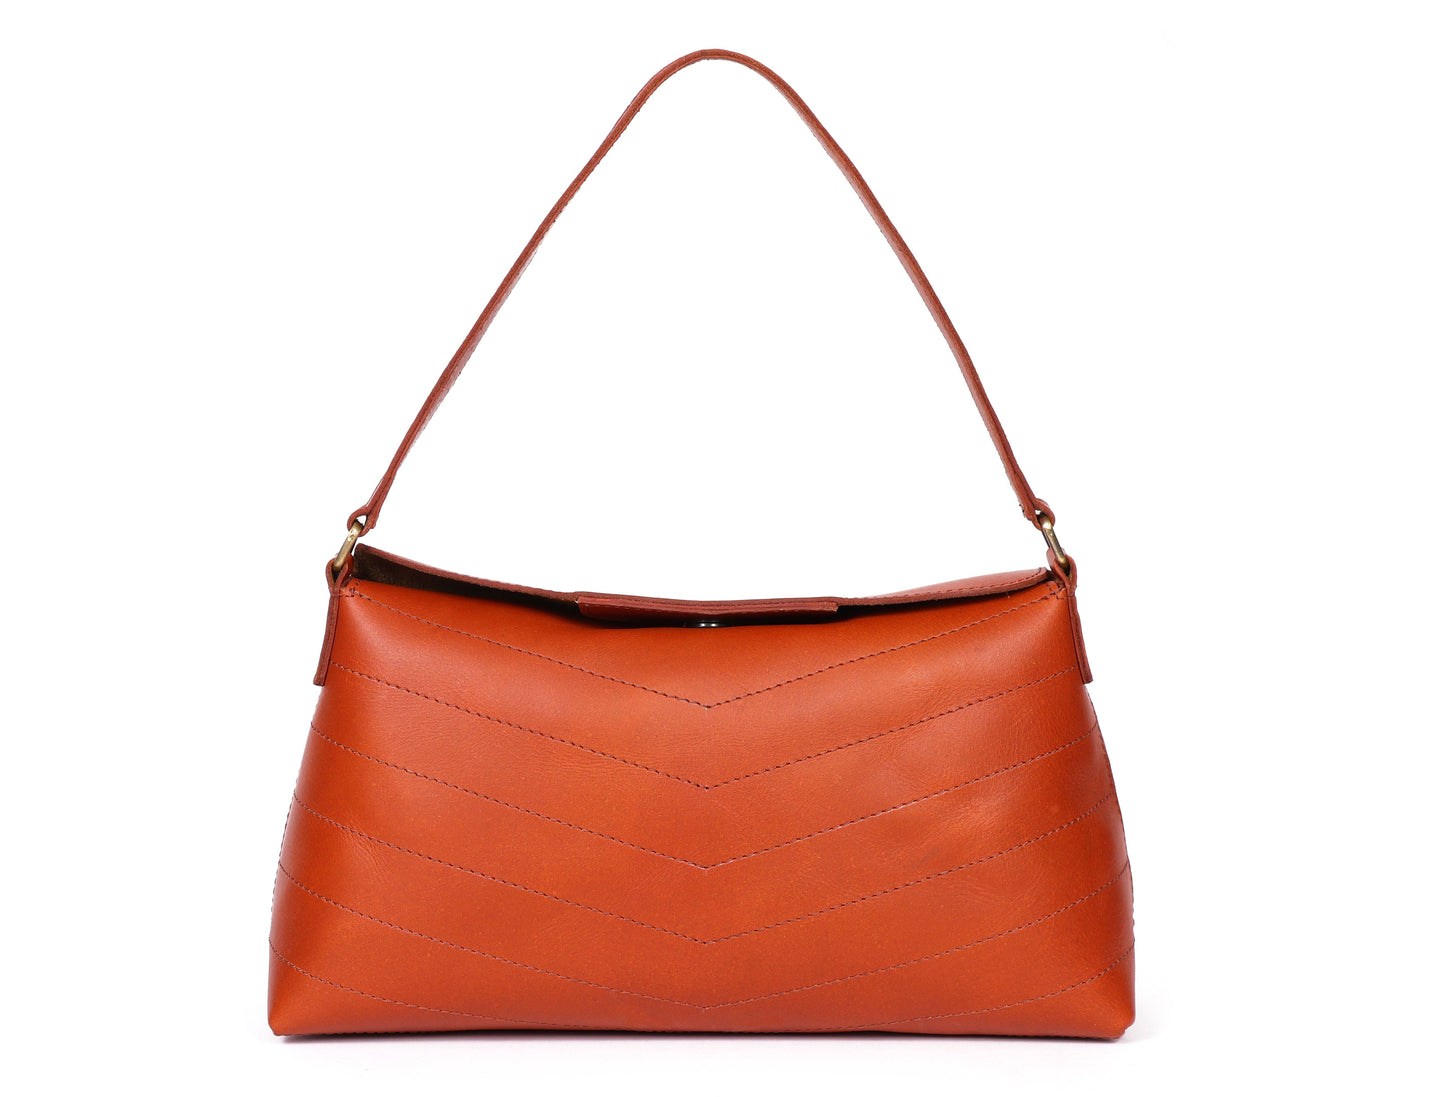 Exquisite Tan Leather Small Sling Bag - CELTICINDIA